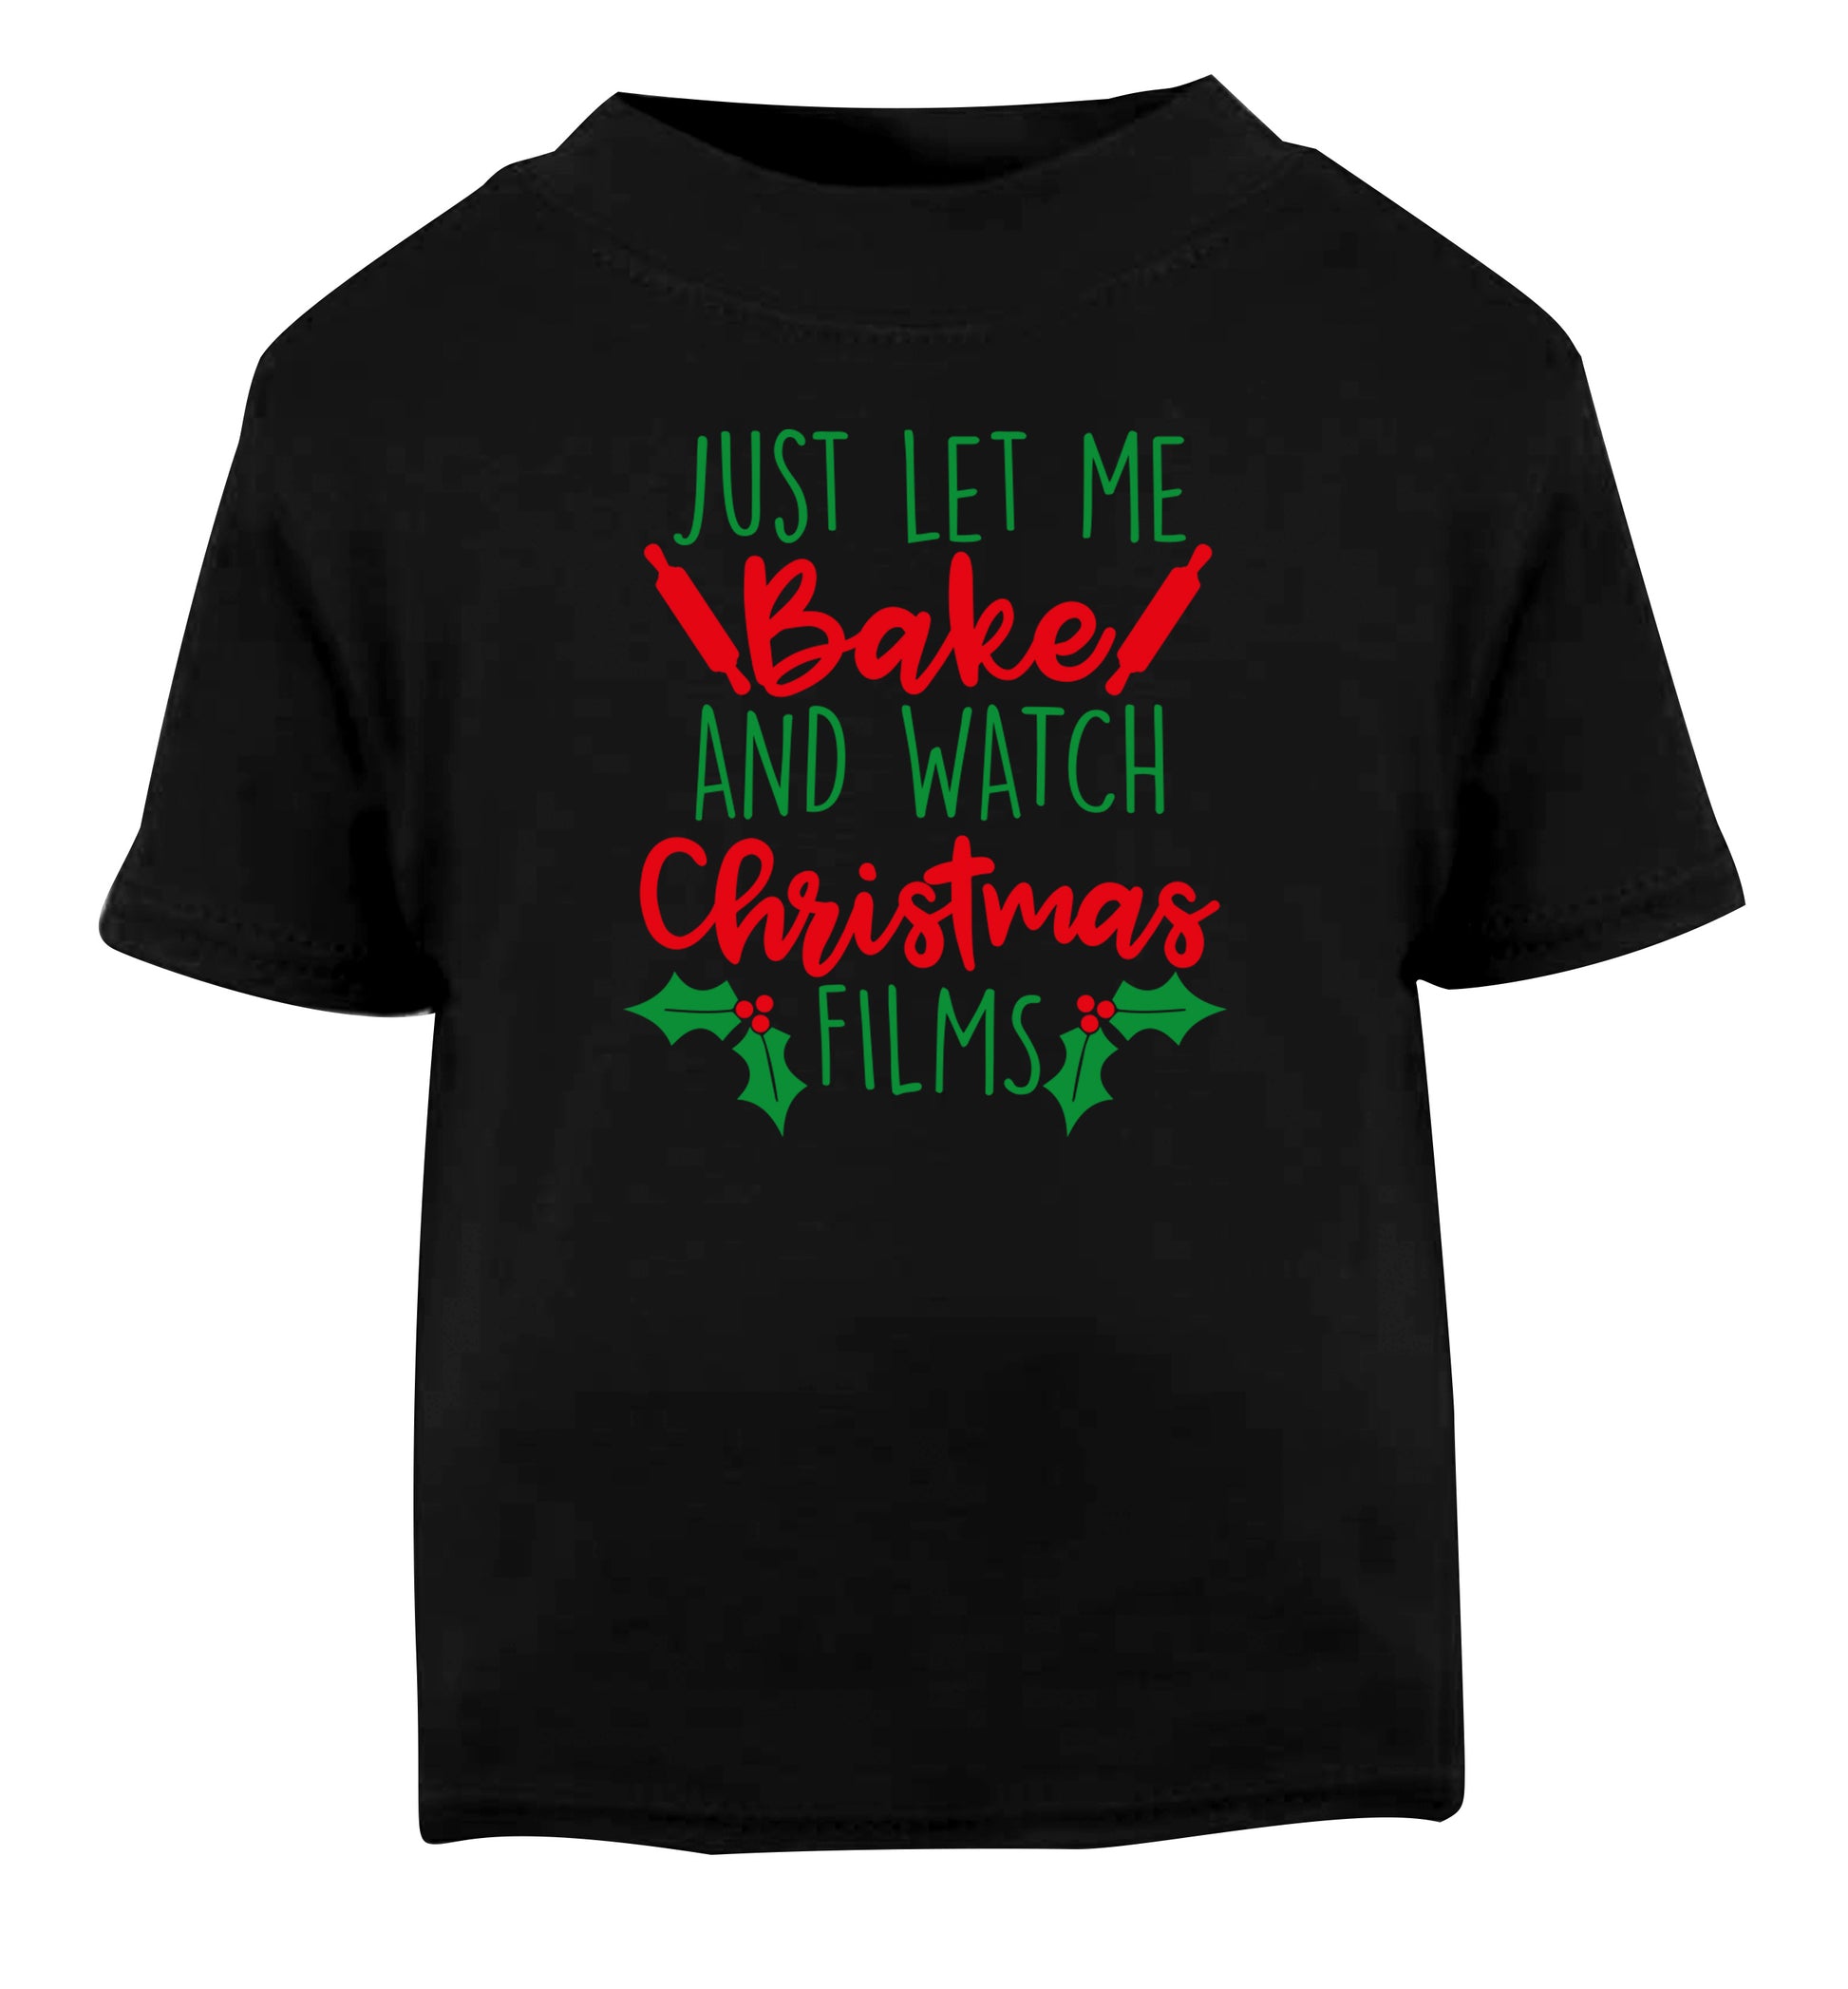 Just let me bake and watch Christmas films Black Baby Toddler Tshirt 2 years